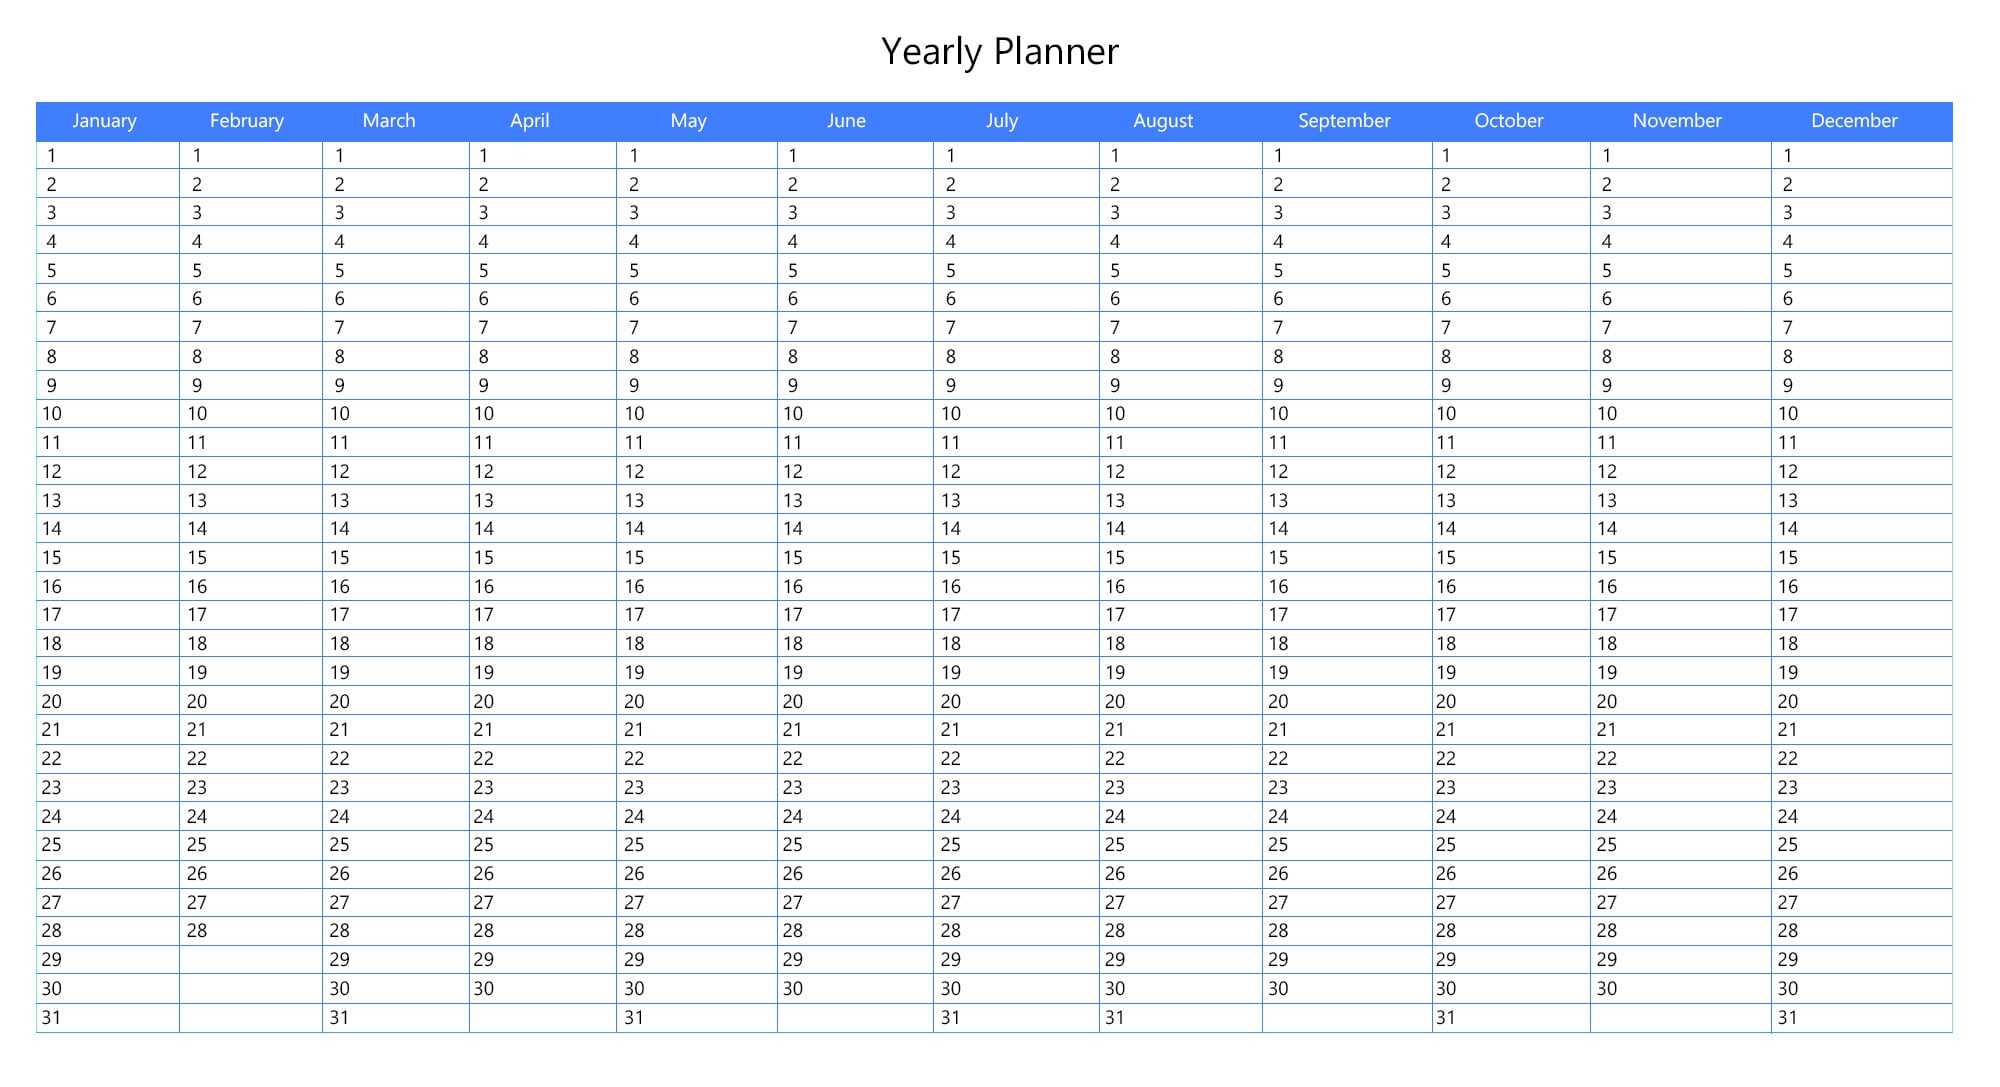 Annual Planner Template